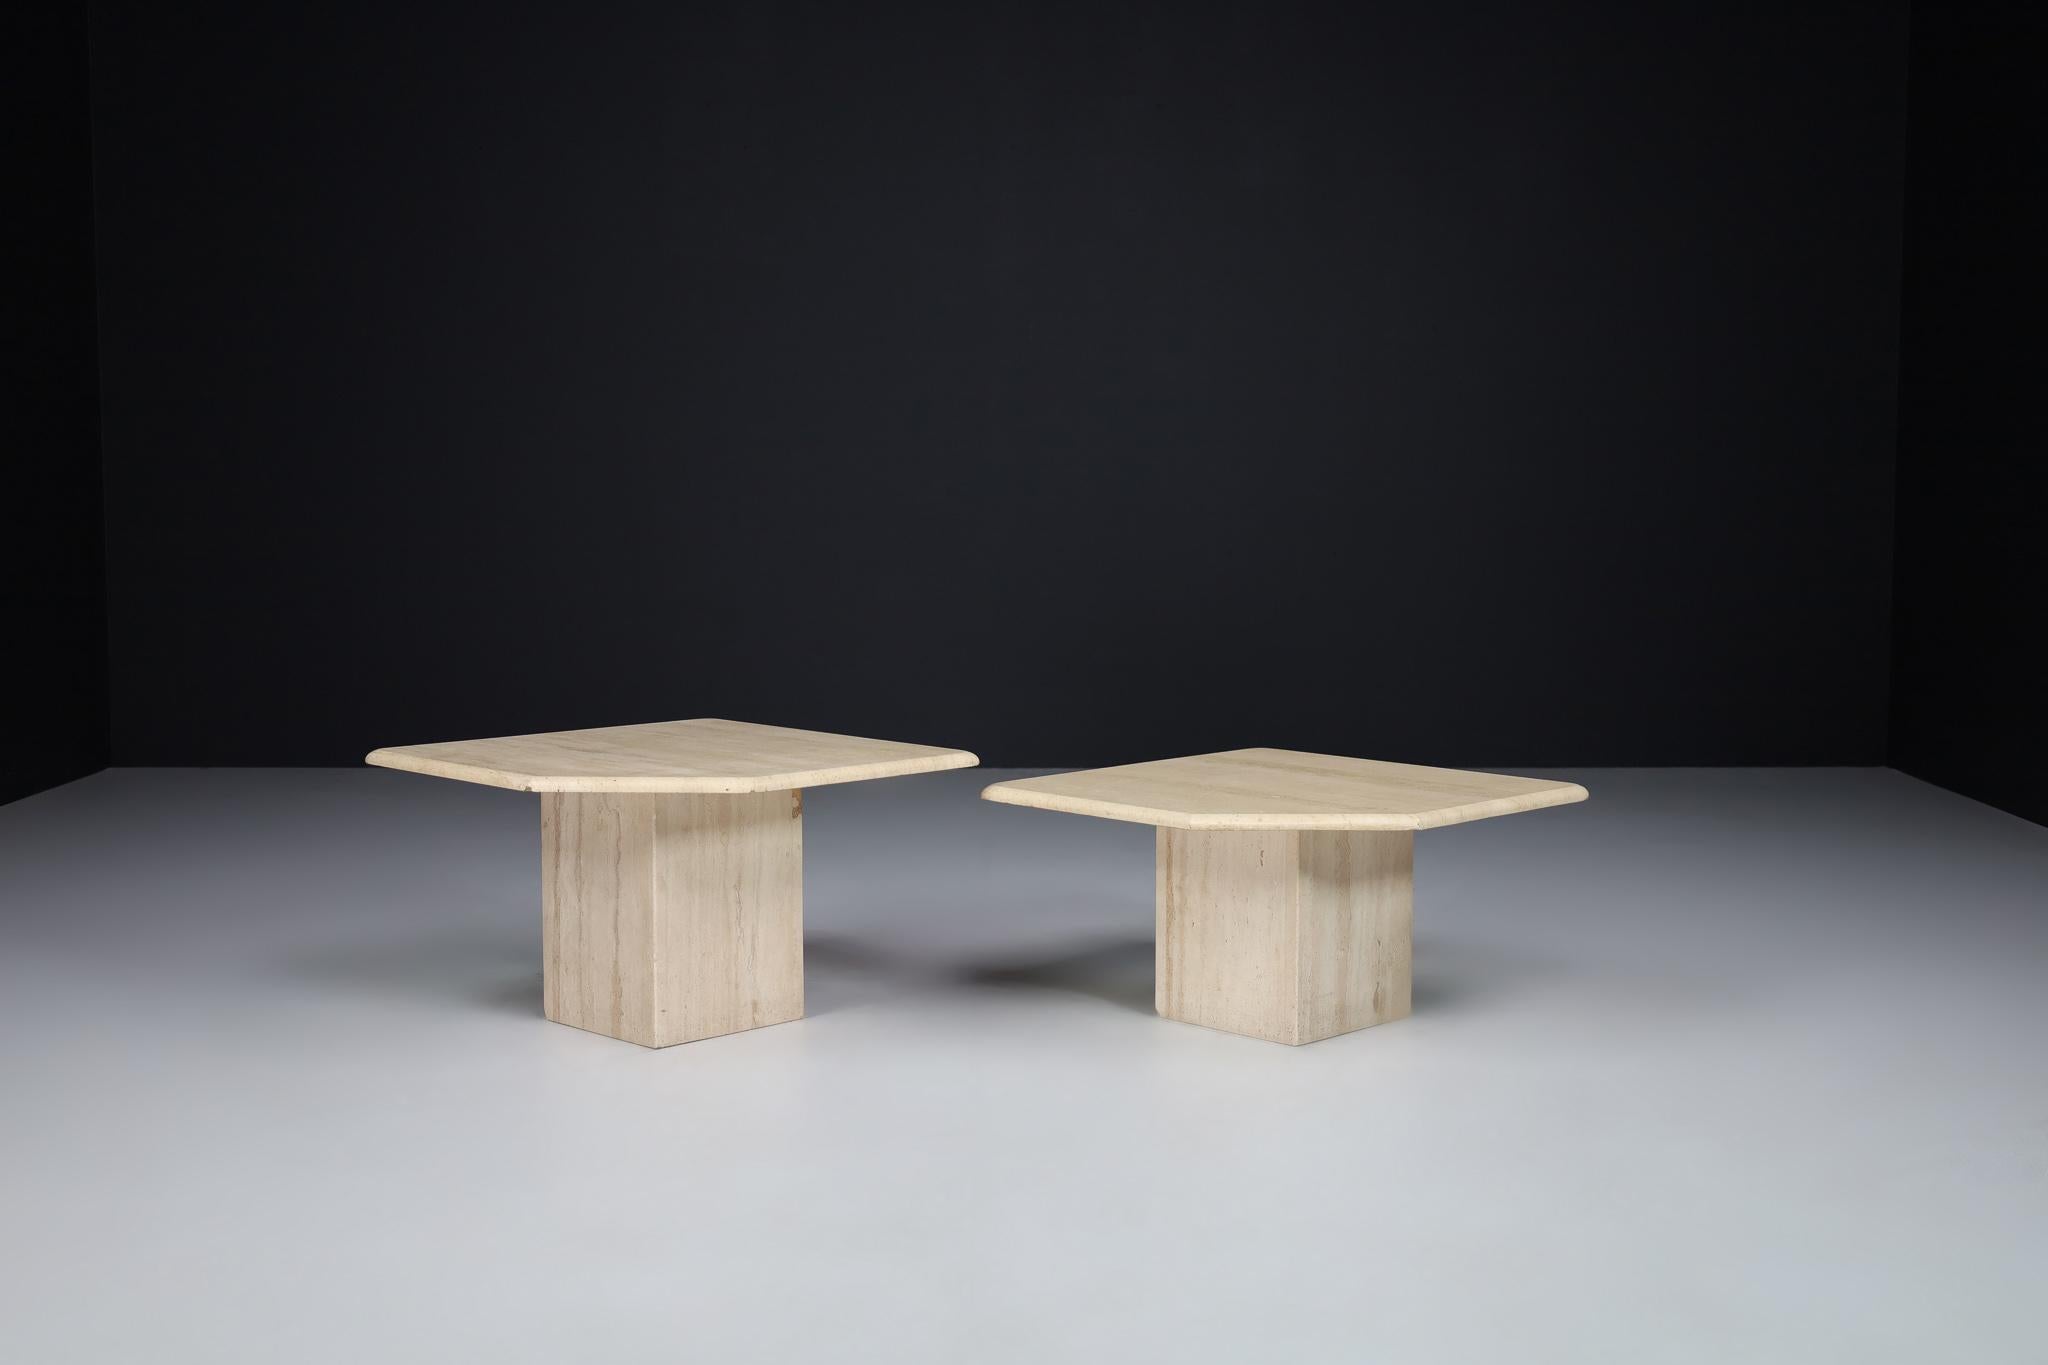 Mid-Century Modern Travertine side or end tables, Italy 1970s

This beautiful set of post-modern travertine side - coffee tables, circa the 1970s, has beautiful graining and a pentagonal top. This sculptural travertine side table would work great